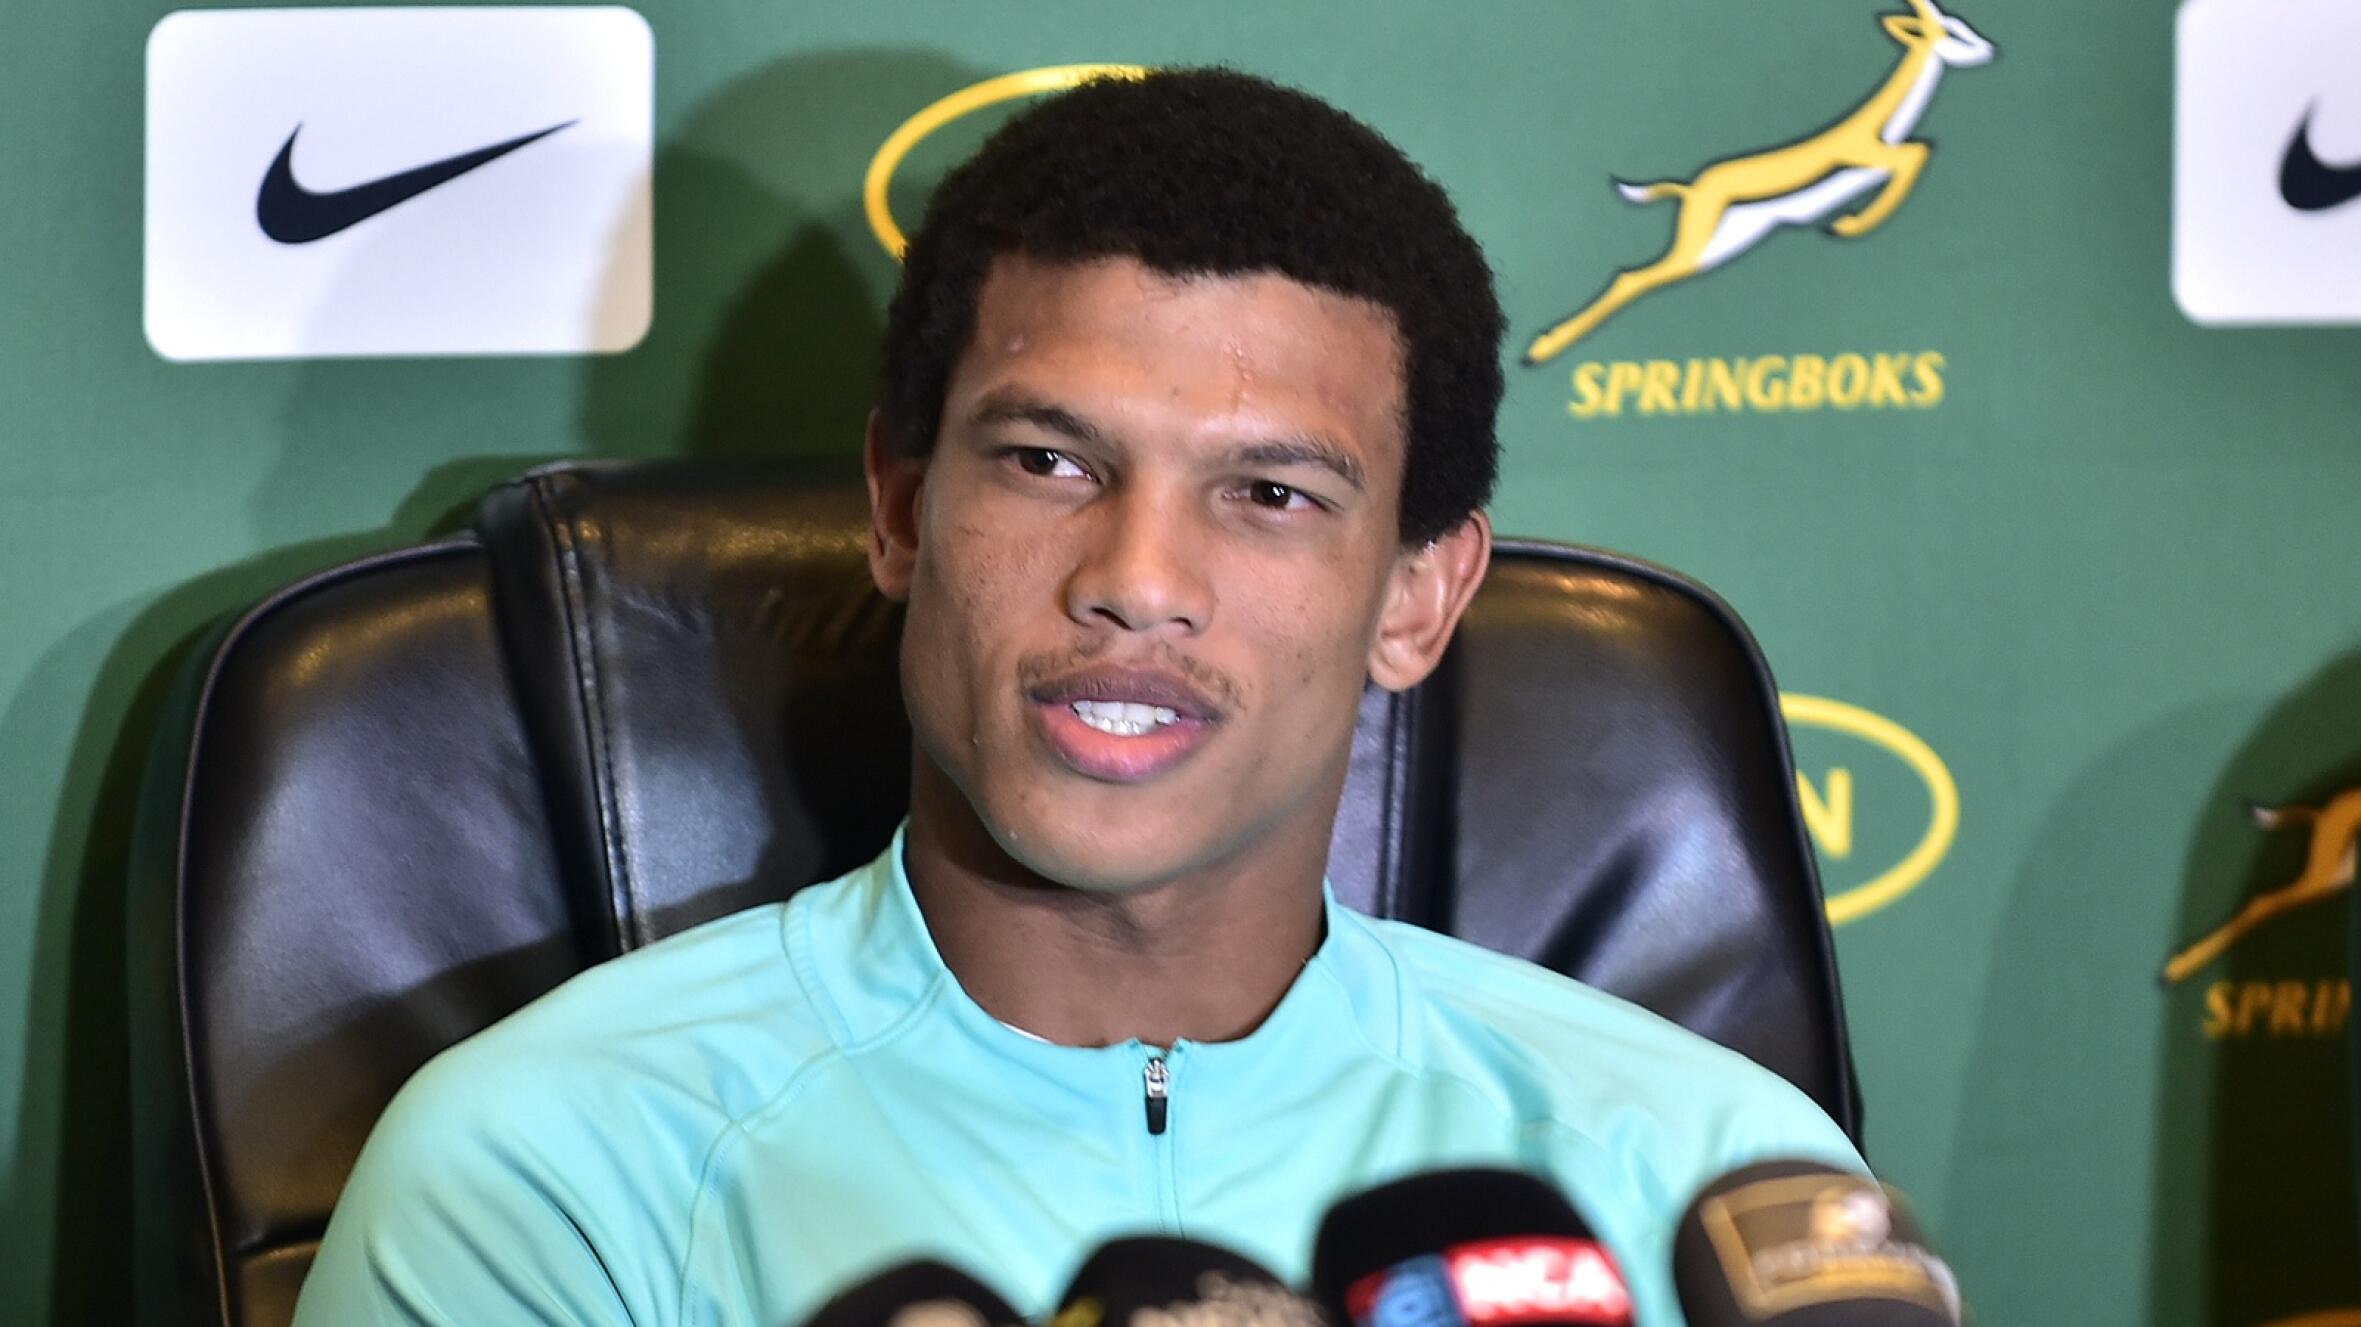 Springboks player Kurt-Lee Arendse at the team announcement conference.